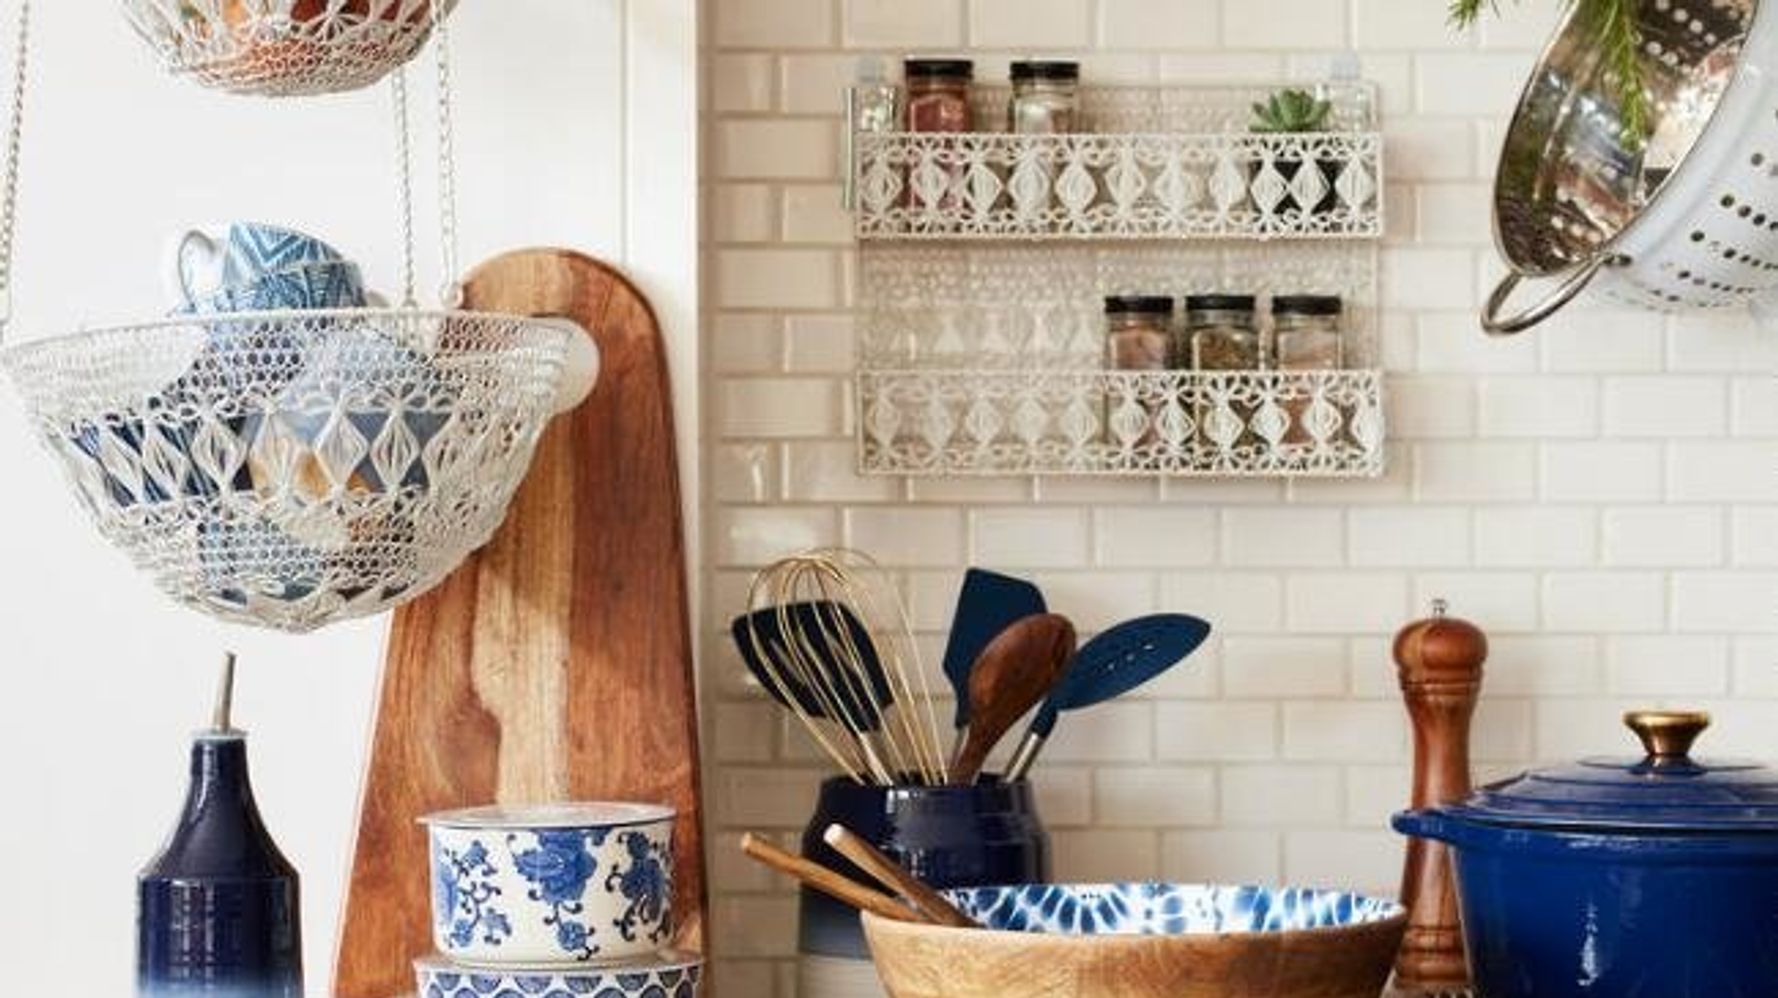 12 Spice Storage Ideas for a Well-Seasoned Kitchen